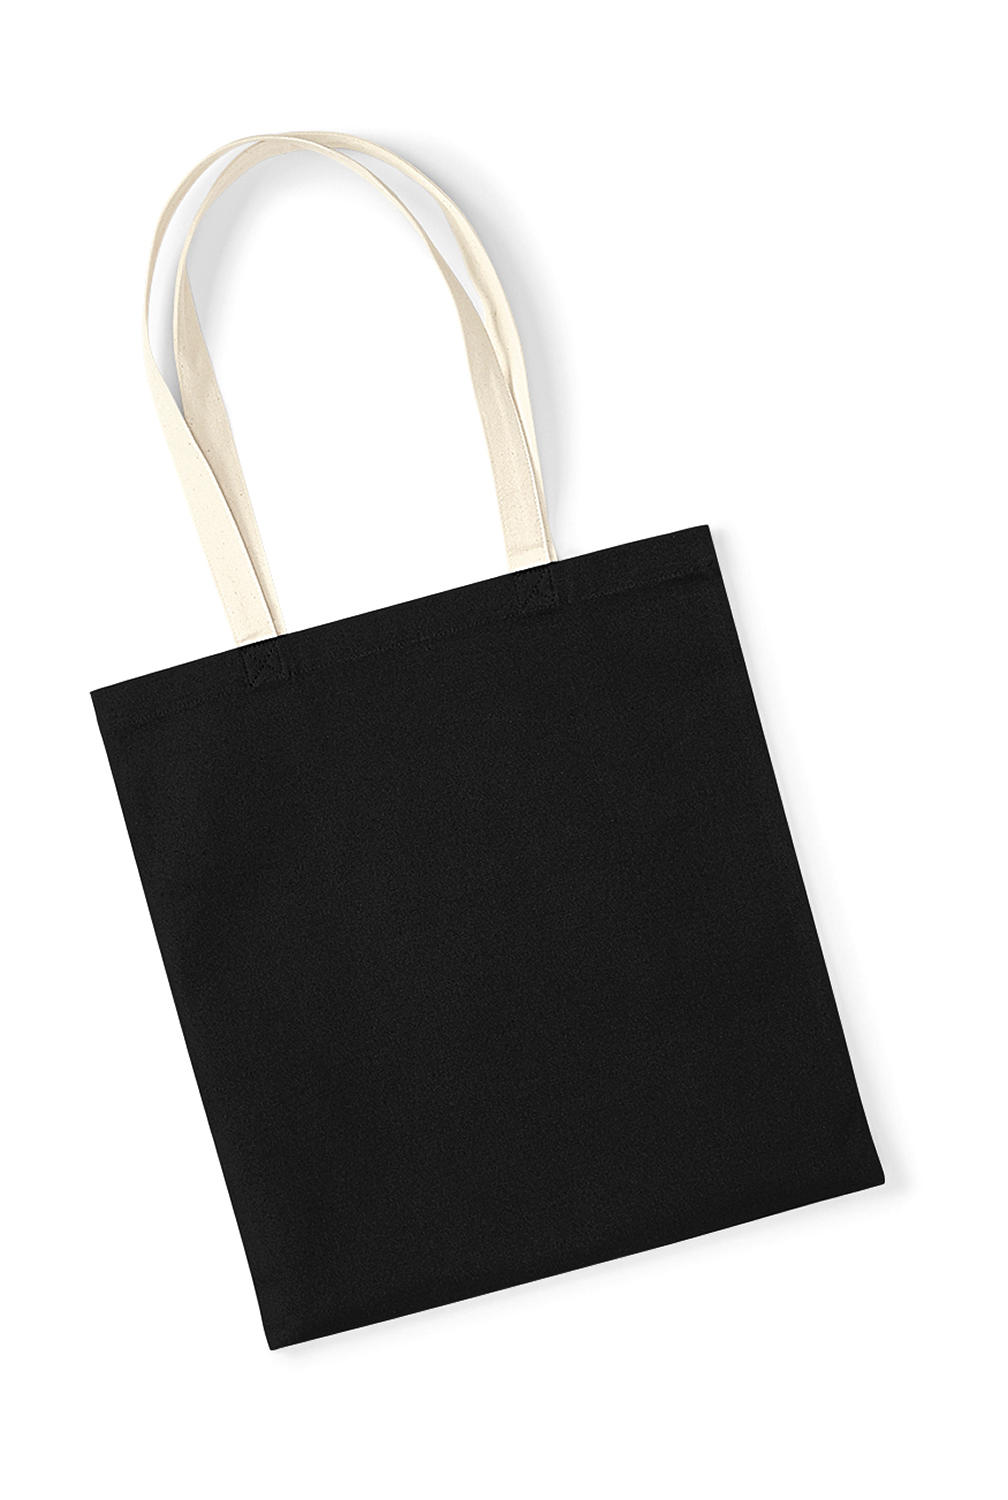  EarthAware? Organic Bag for Life - Contrast Handle in Farbe Black/Natural